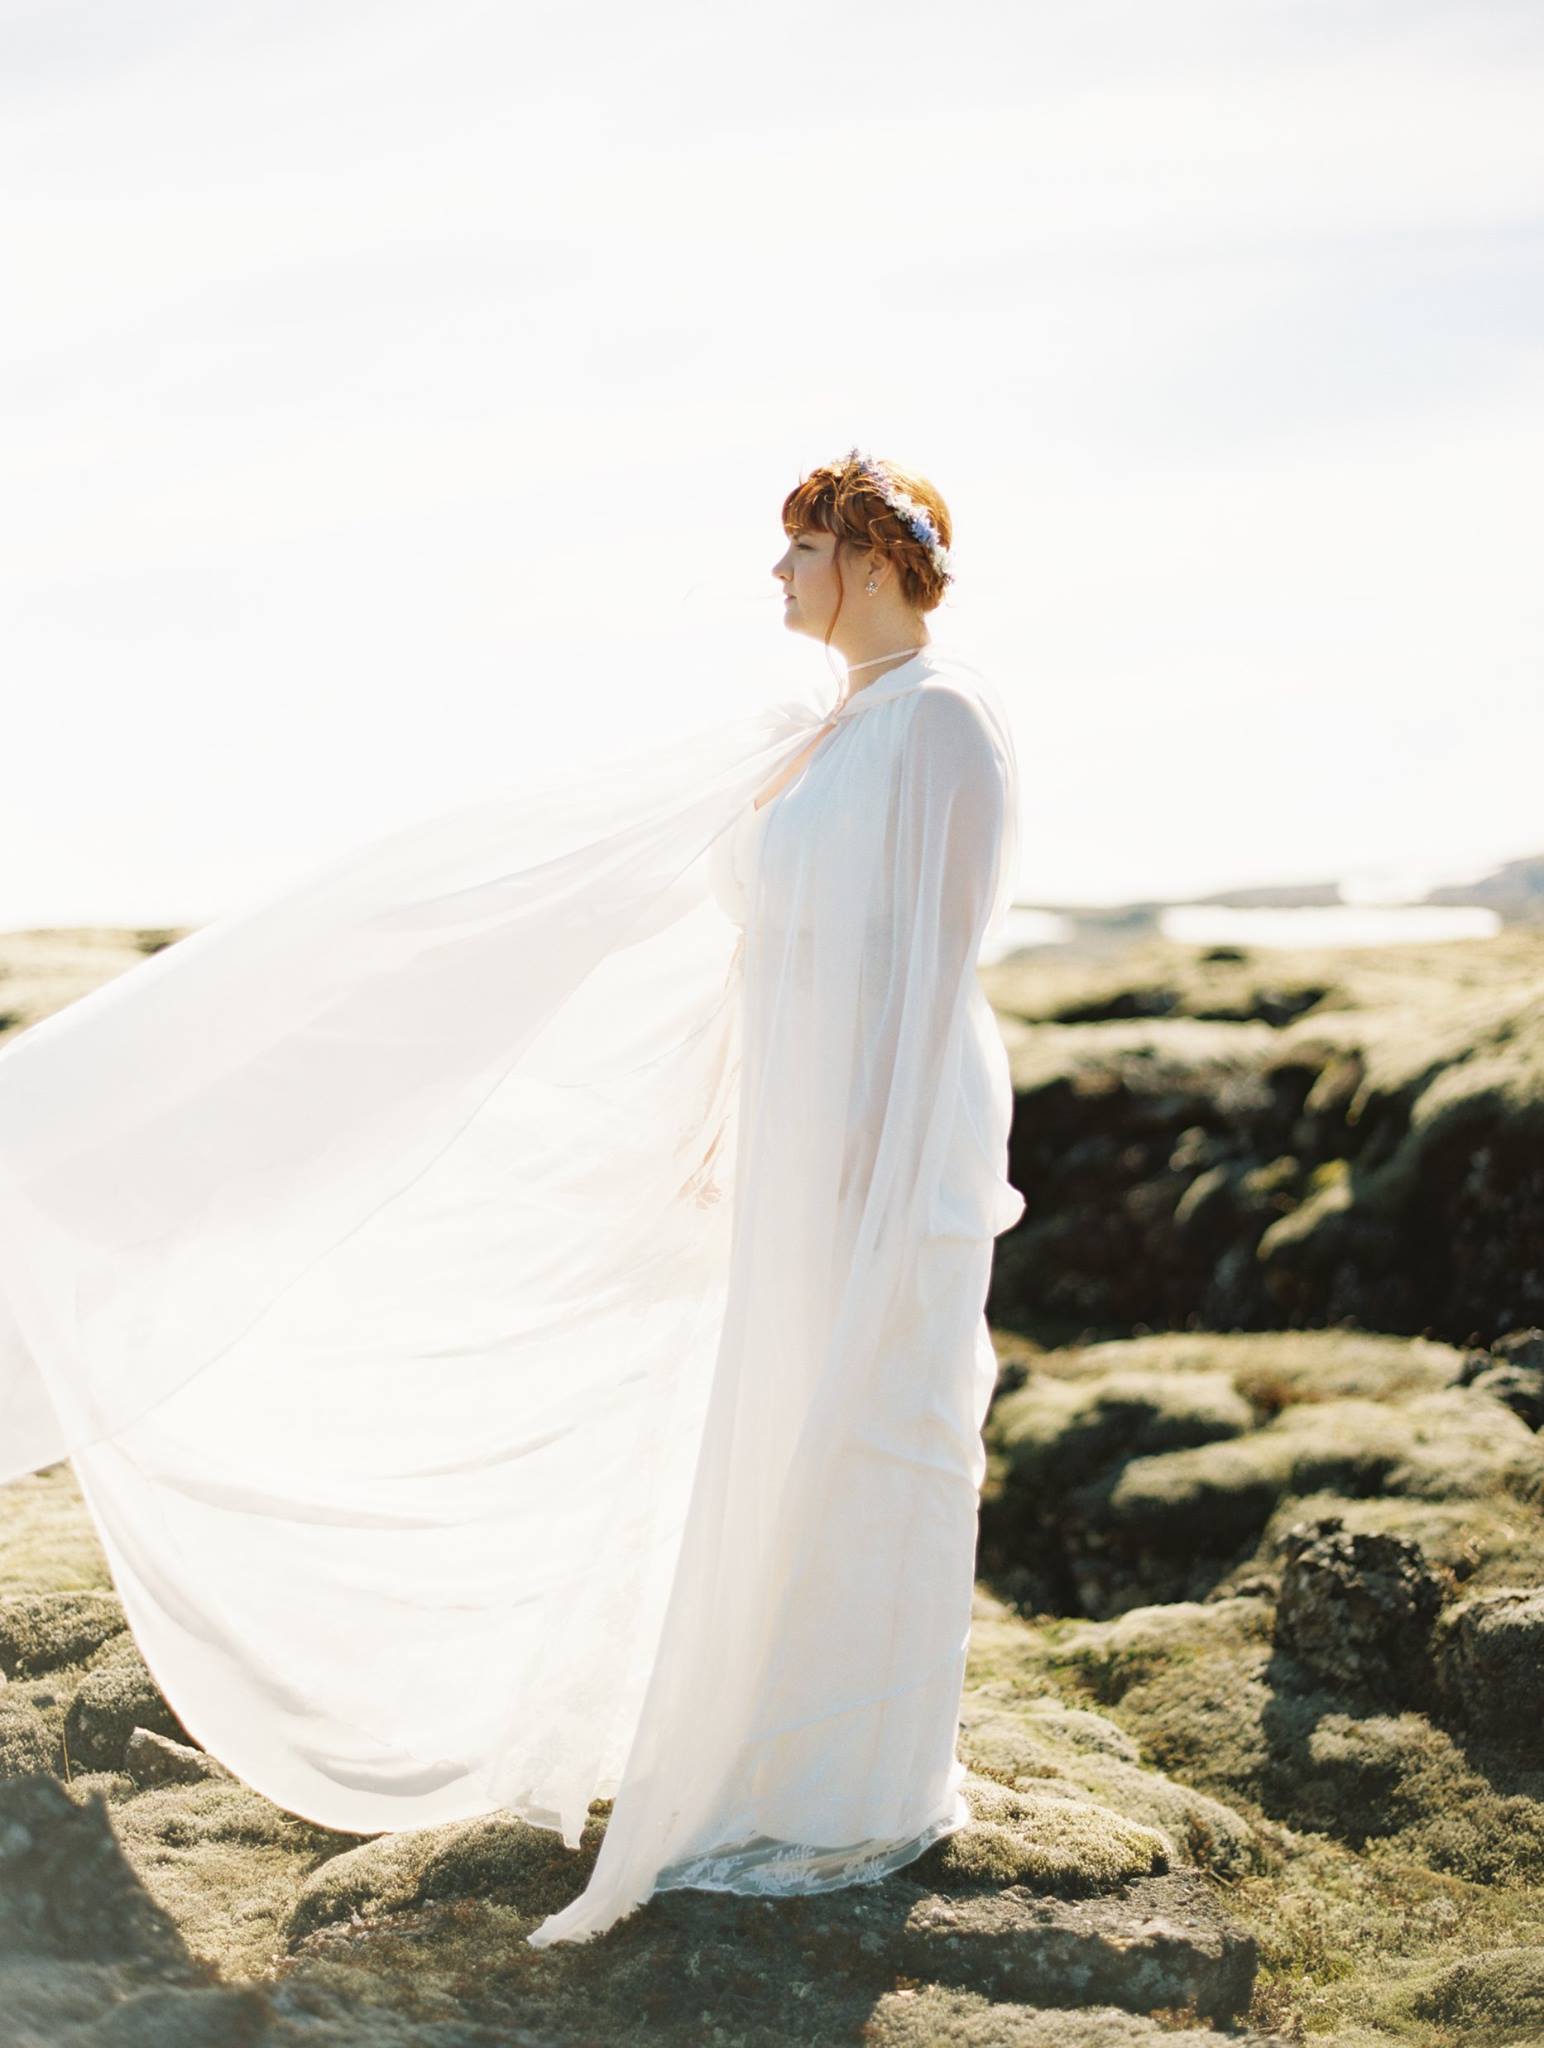  Lynzi | wedding gown by Charlie Brear available at Little White Dress Bridal Shop in Denver |&nbsp;   Brumley &amp; Wells &nbsp;Photography   